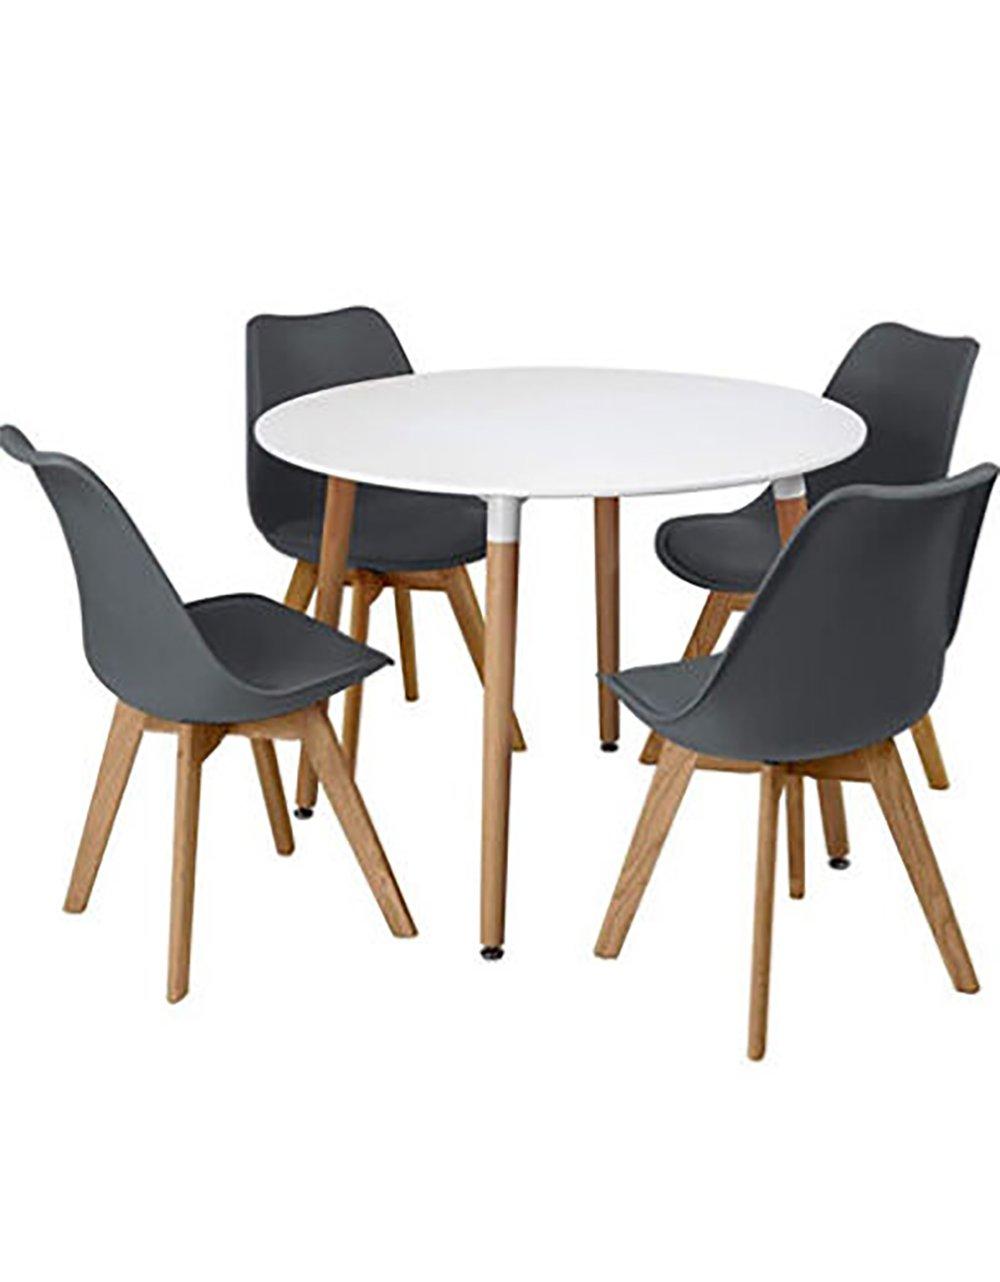 Dining Table Set Of 4 Round Dining Table And Chairs